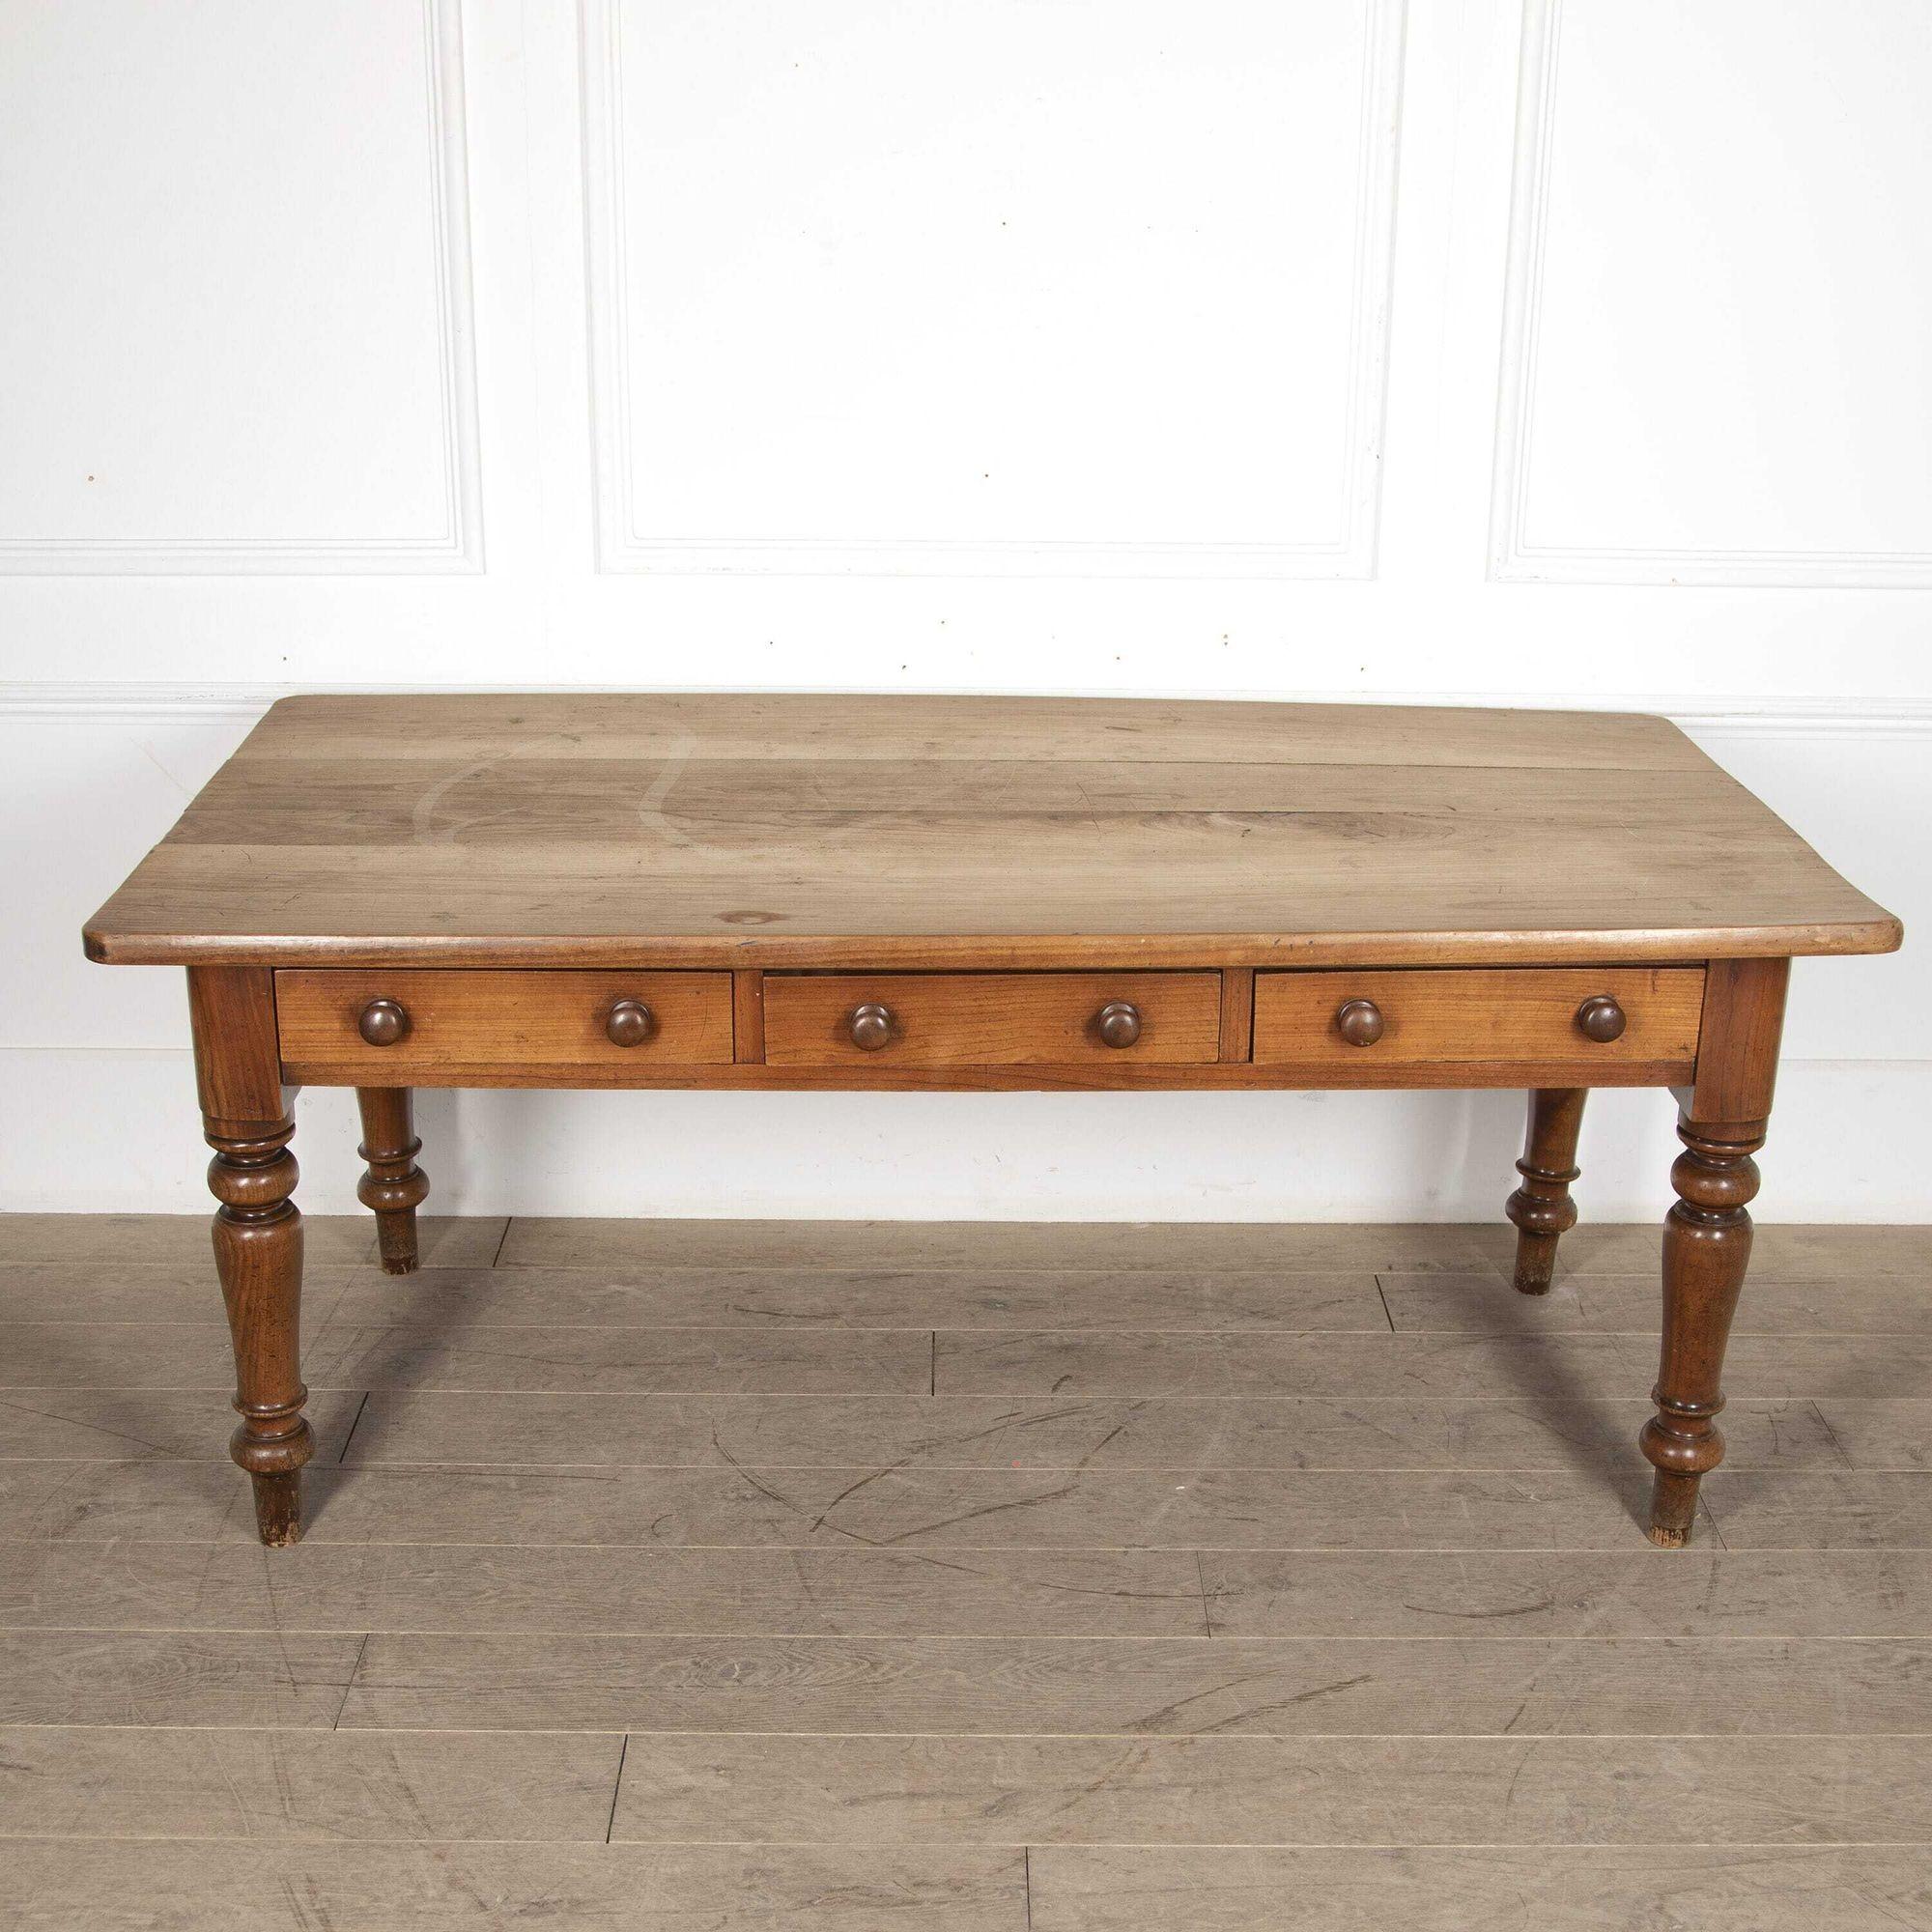 Substantial English sycamore and fruitwood Farmhouse kitchen table with three frieze drawers.
Ideal for a Country House Kitchen.